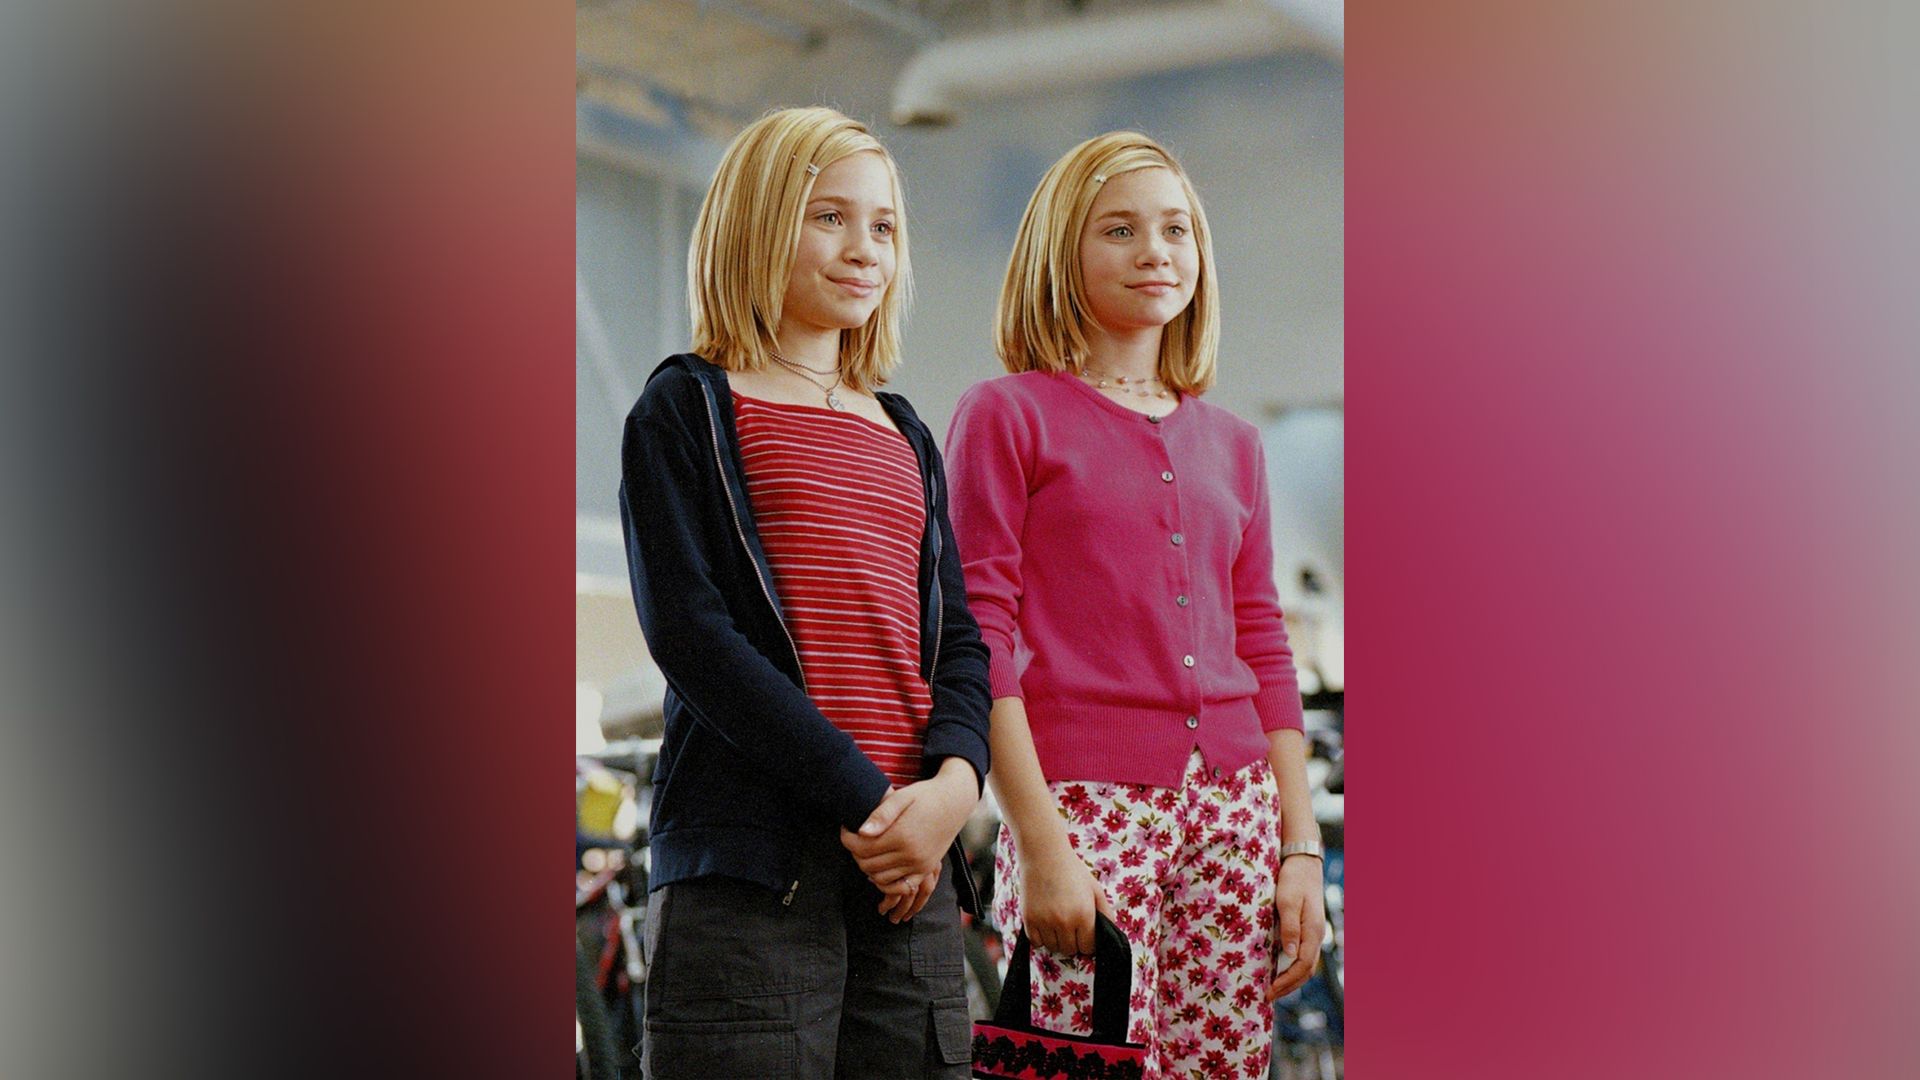 The Olsen twins in the movie 'Switching Goals'